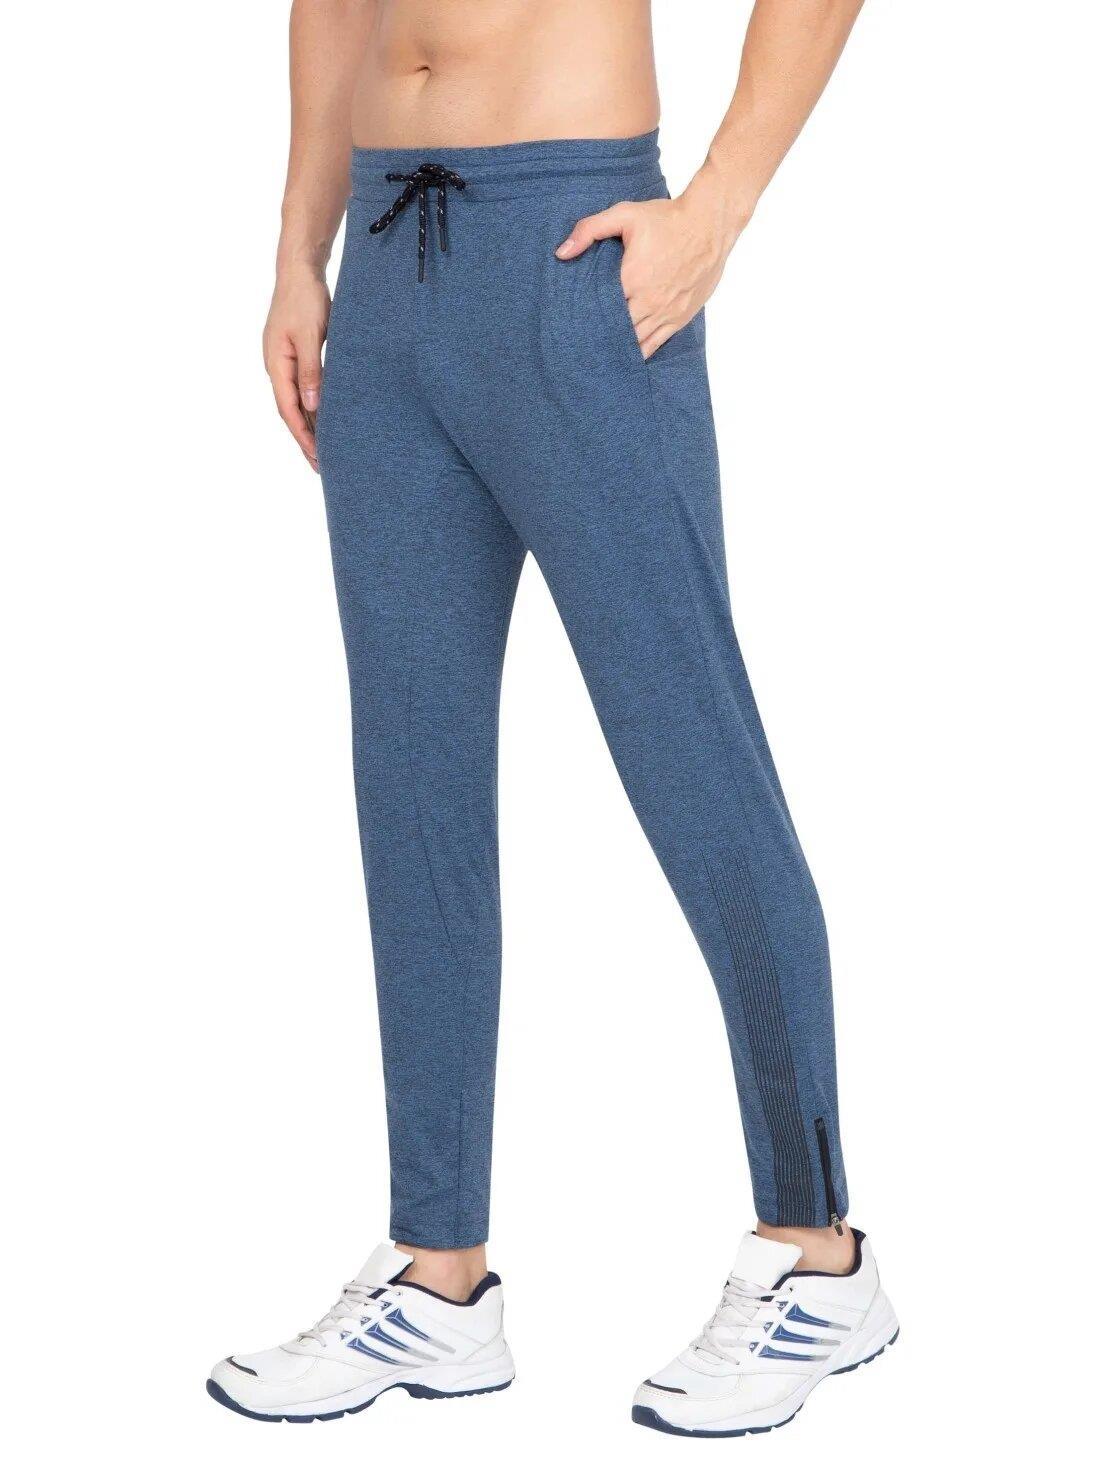 Women's Cycling Track Trousers